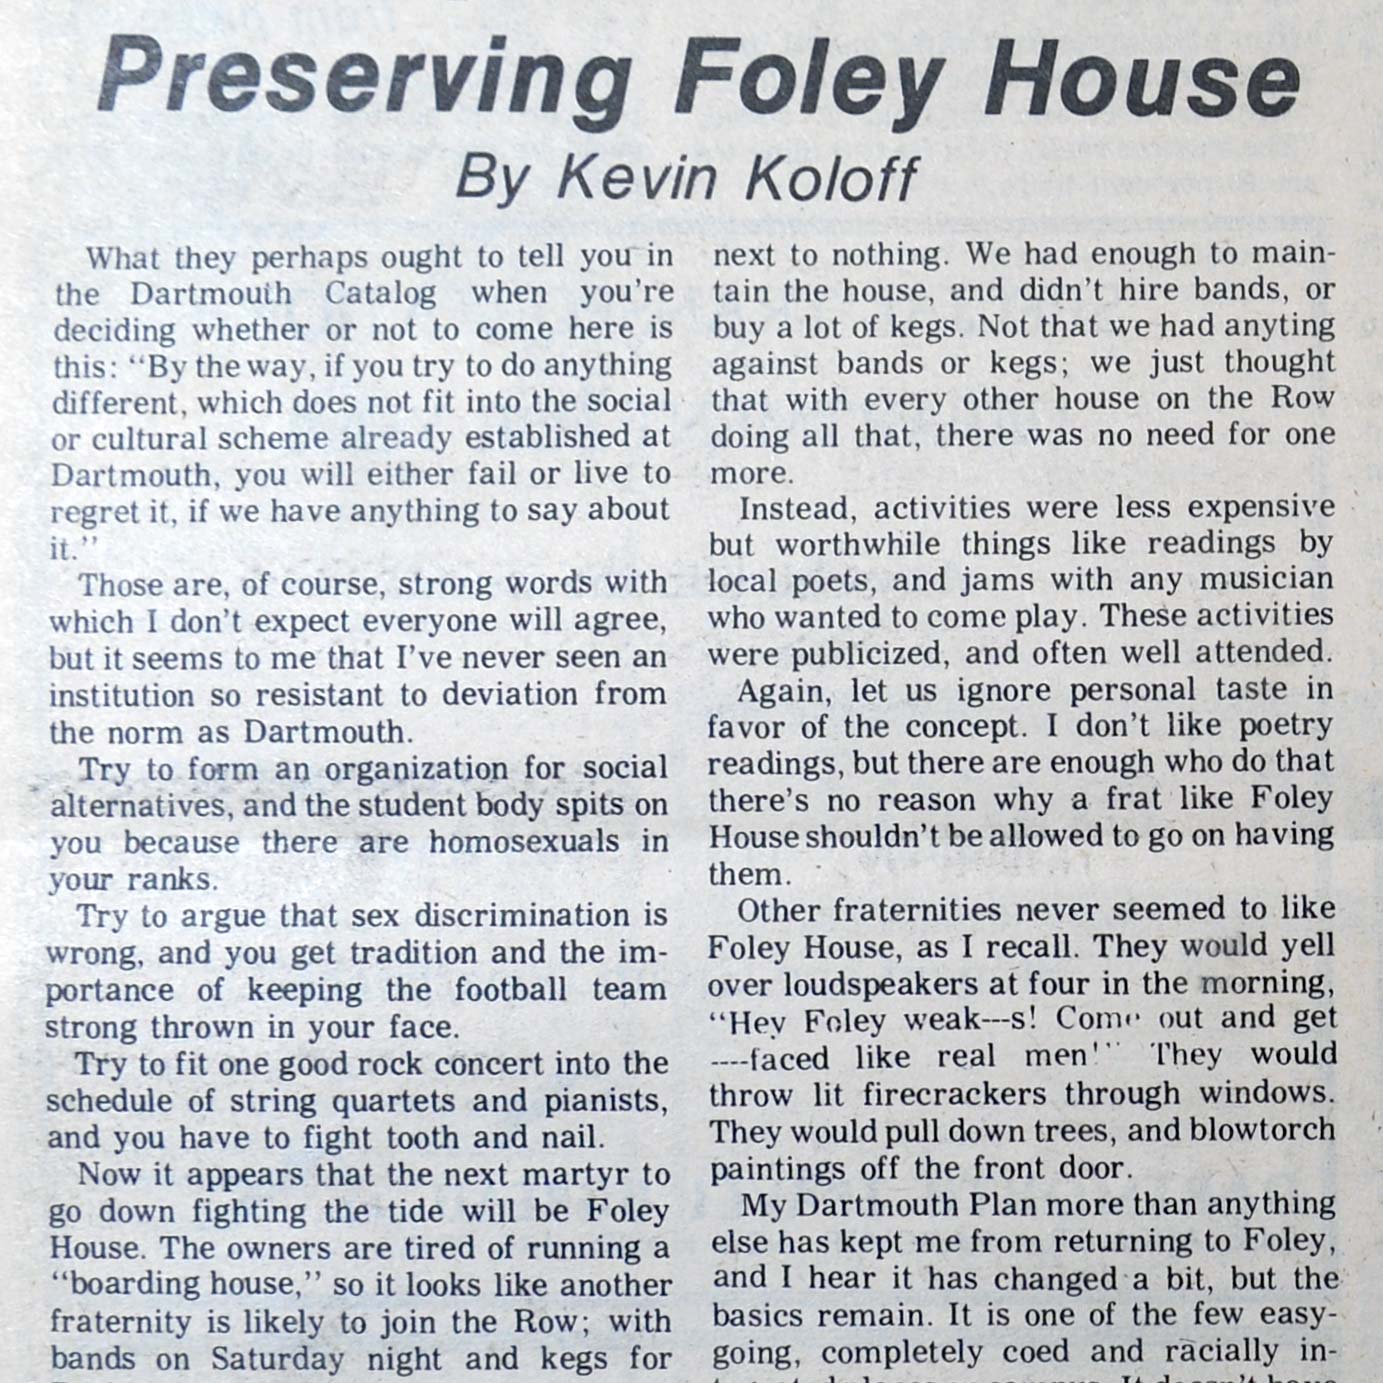 Photo of a newspaper article, which shows the title "Preserving Foley House," the name of the author Kevin Koloff, and snippets of the article text.